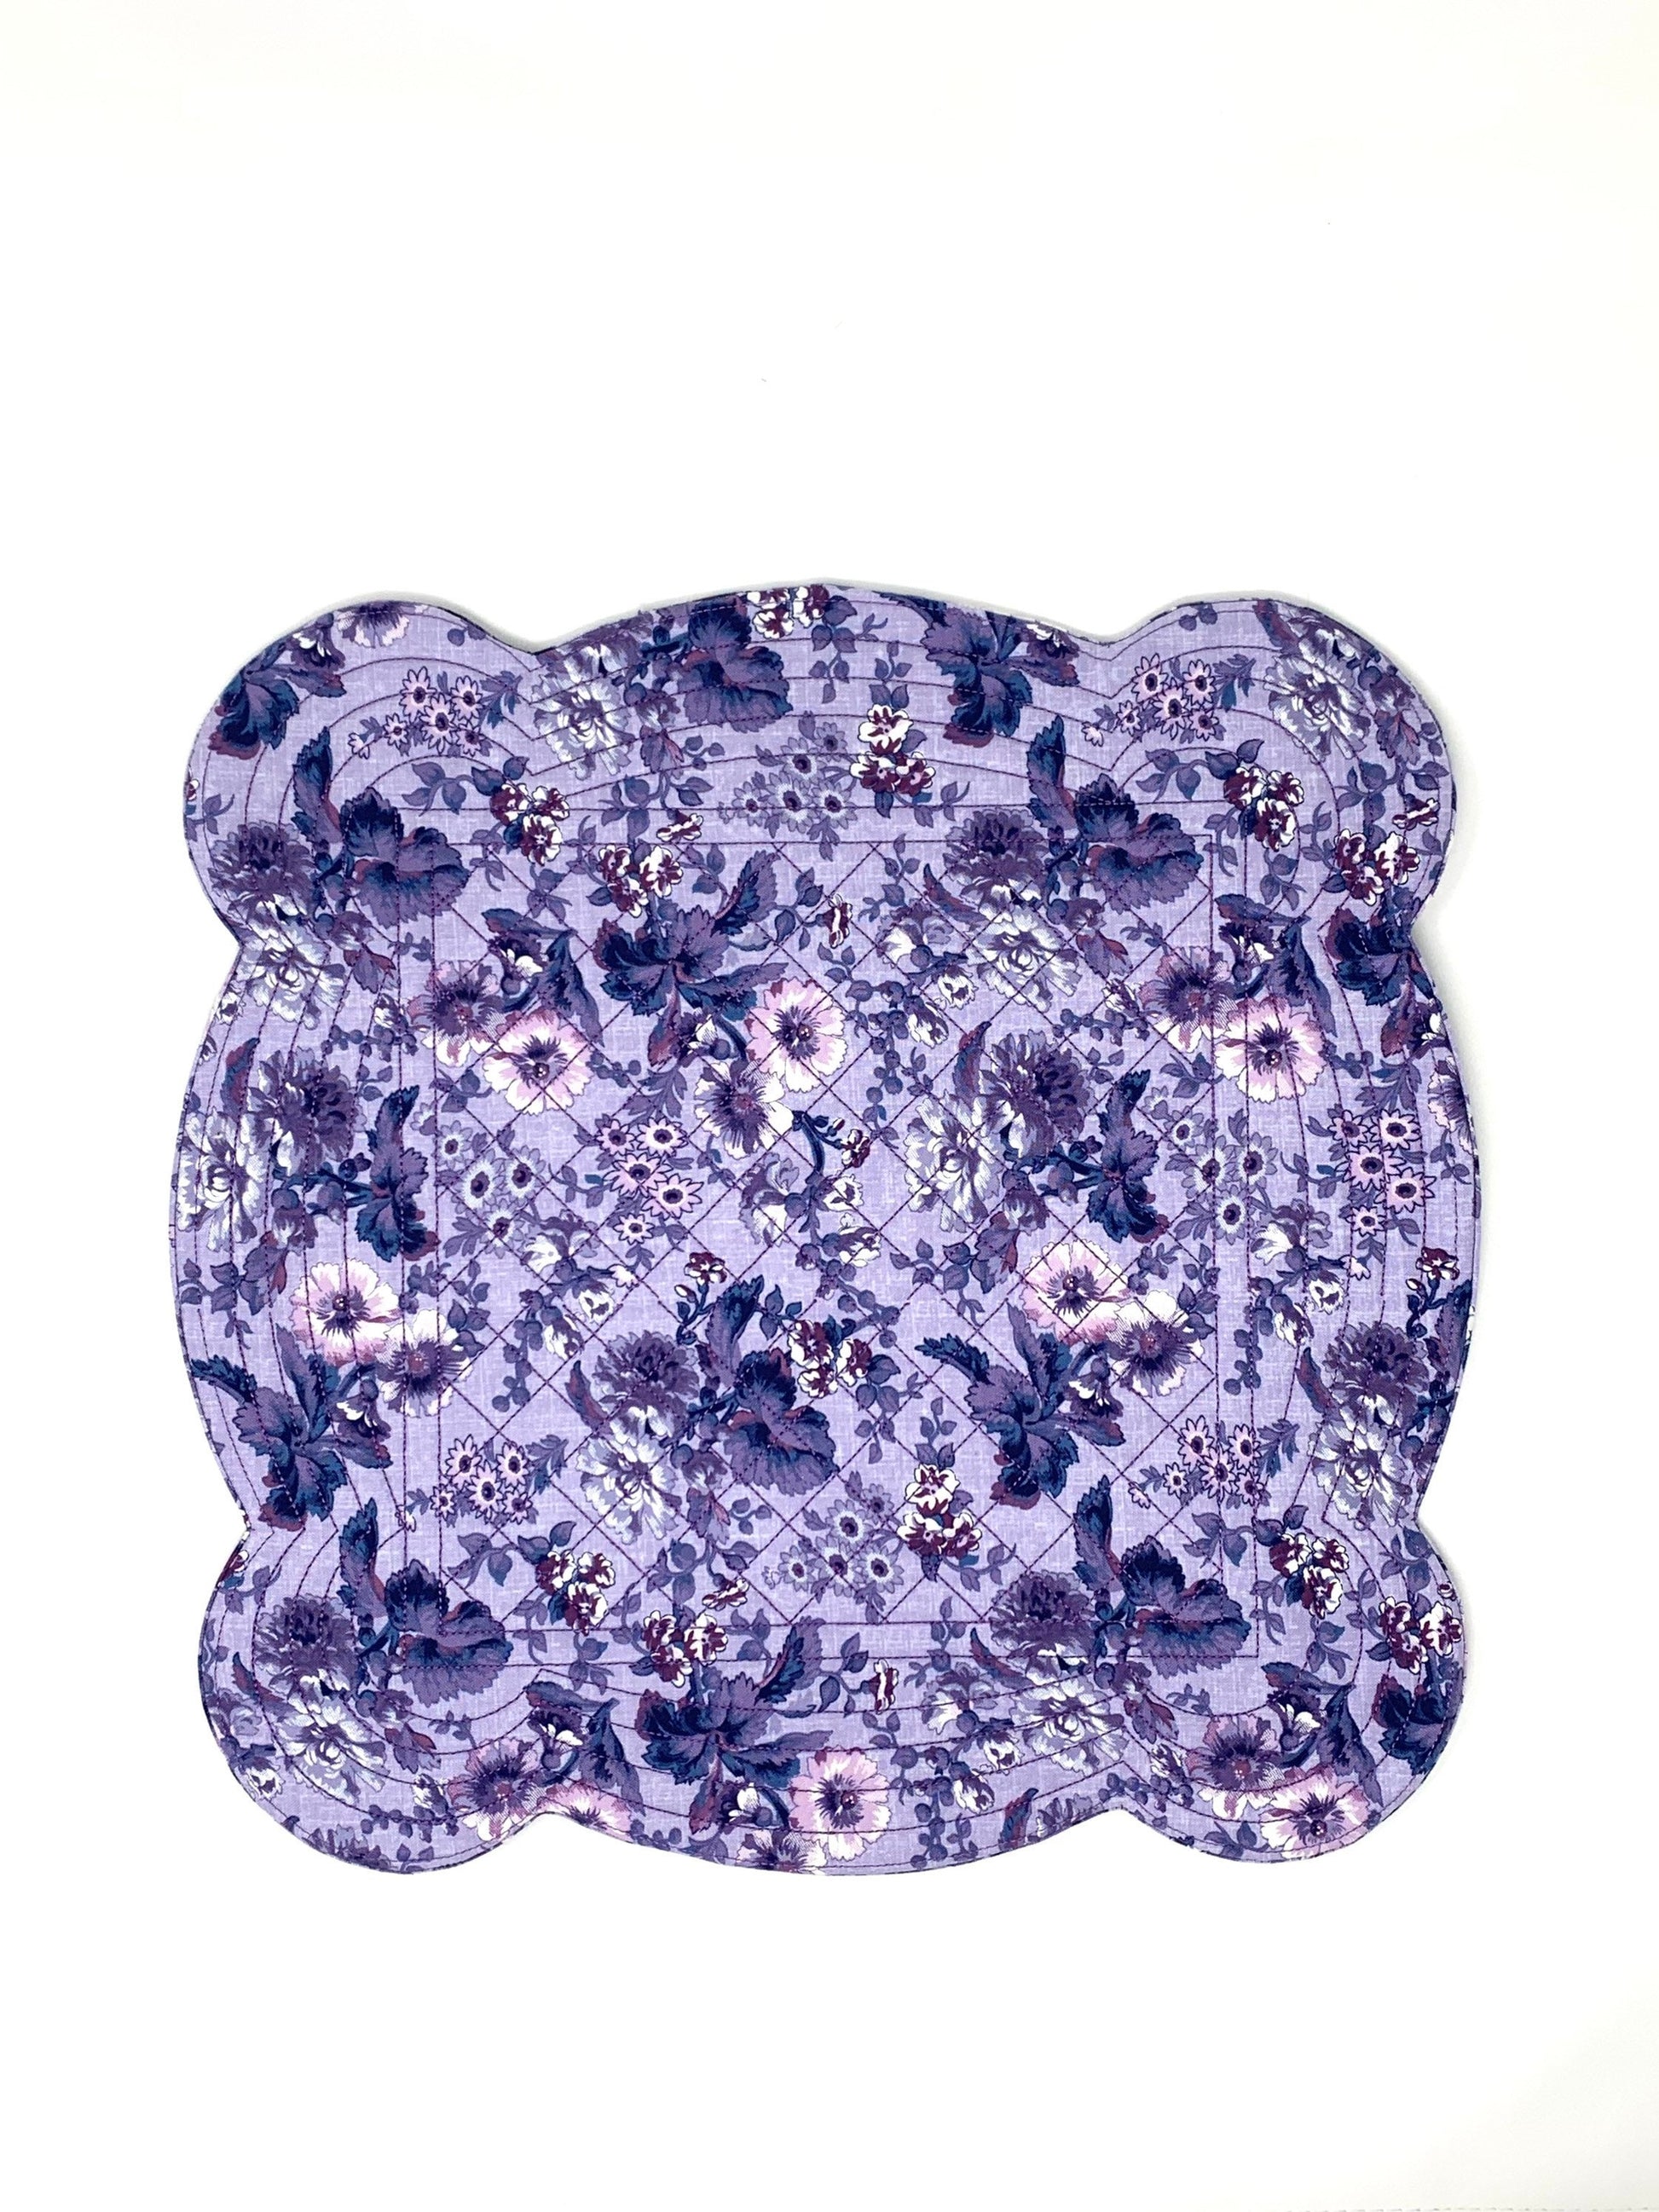 Shabby Chic Purple Scalloped Place Mats, Set of 2, Floral, Scalloped Edge, Mini Quilts, Handmade